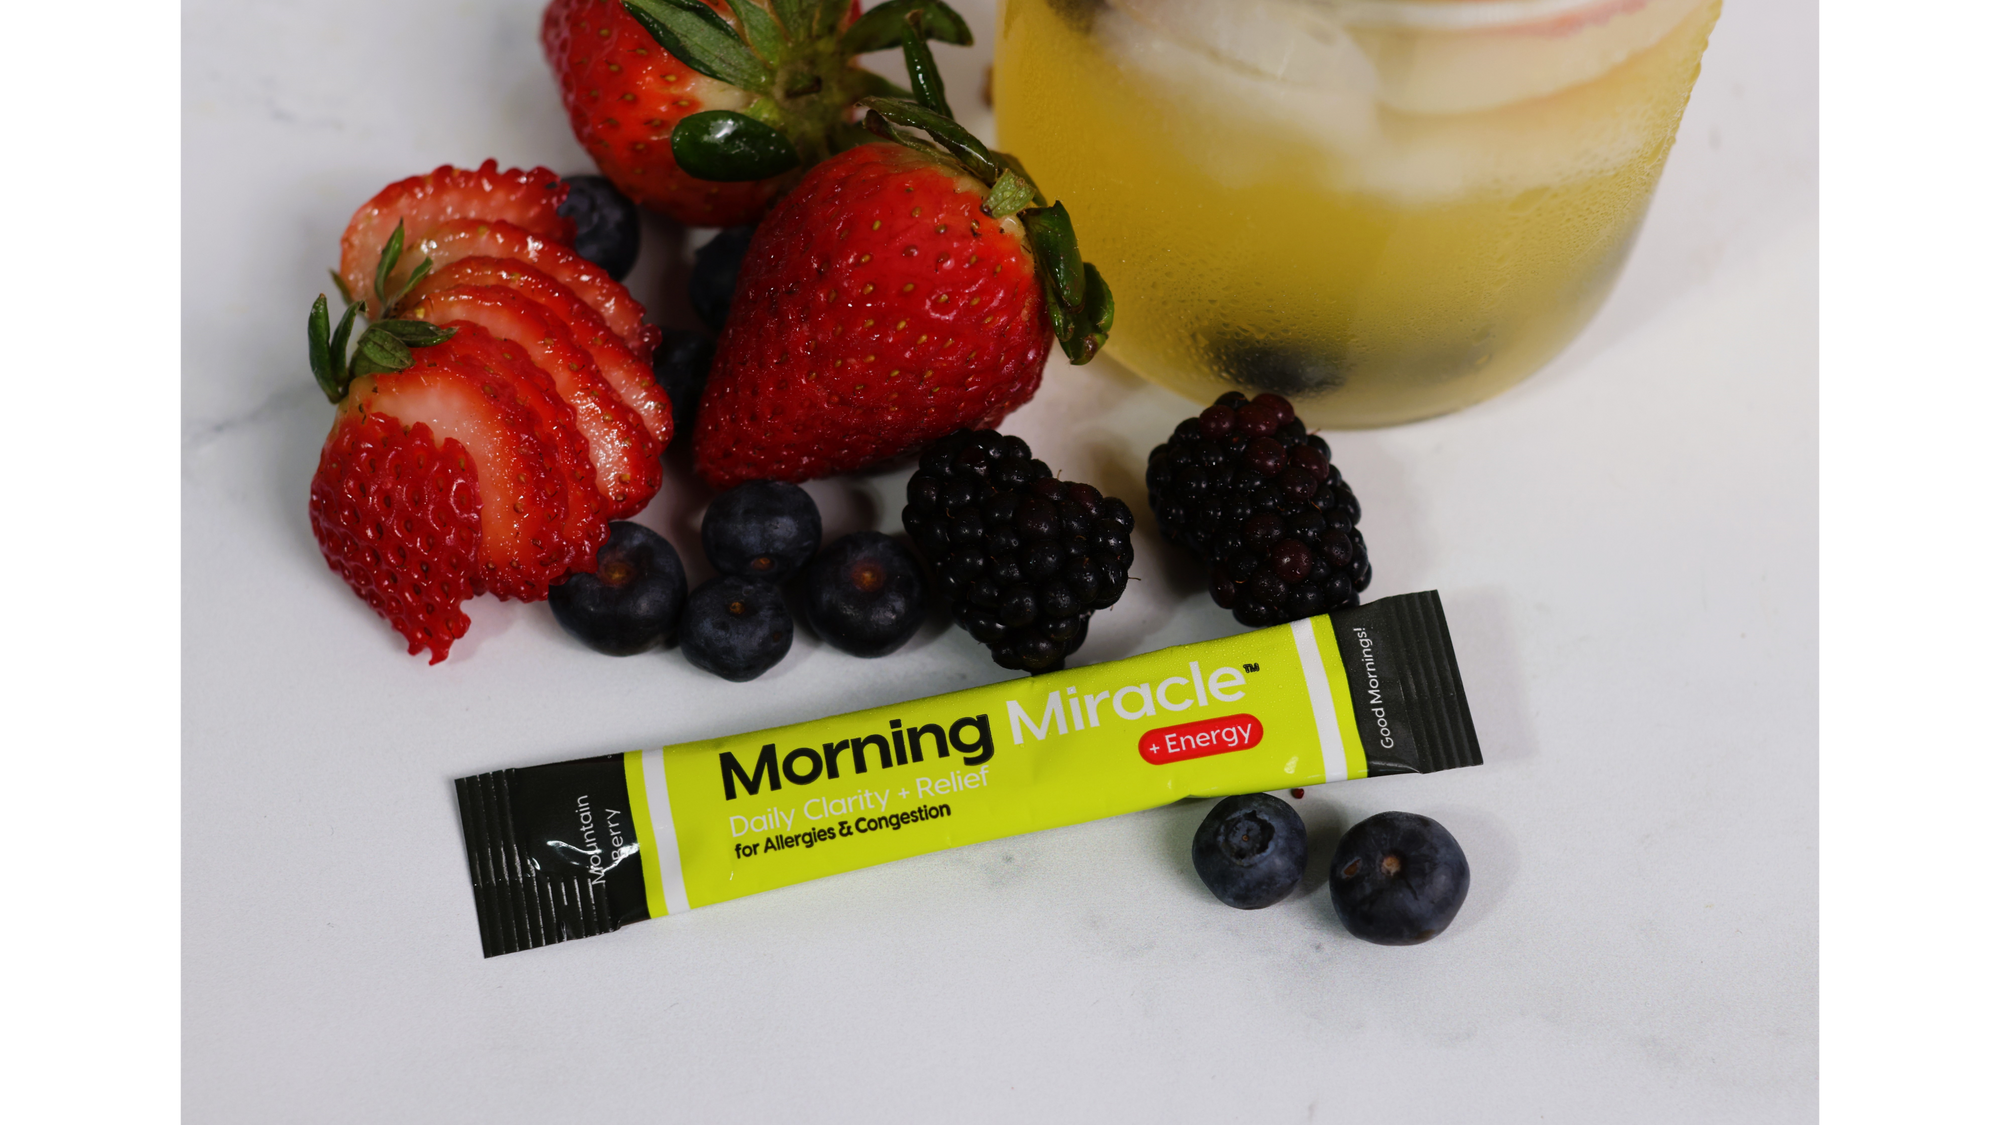 Daily Congestion & Allergy Relief - Morning Miracle™